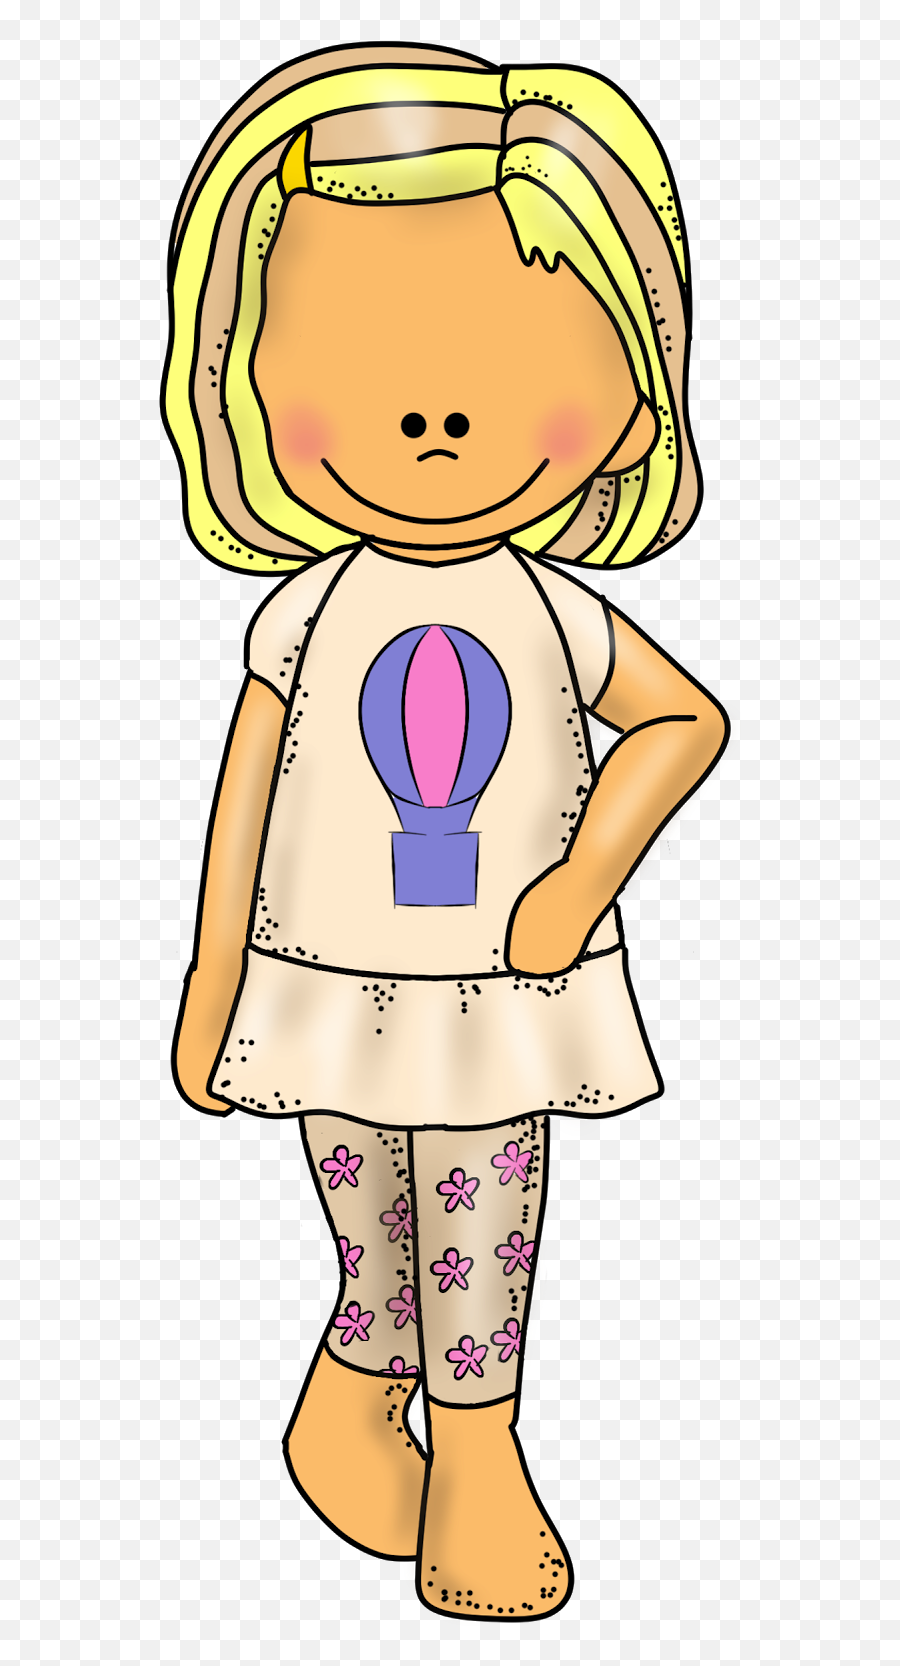 Happiness Clipart 2 Sister Happiness 2 - Old Sister Transparent Clipart Emoji,Sister Emoji